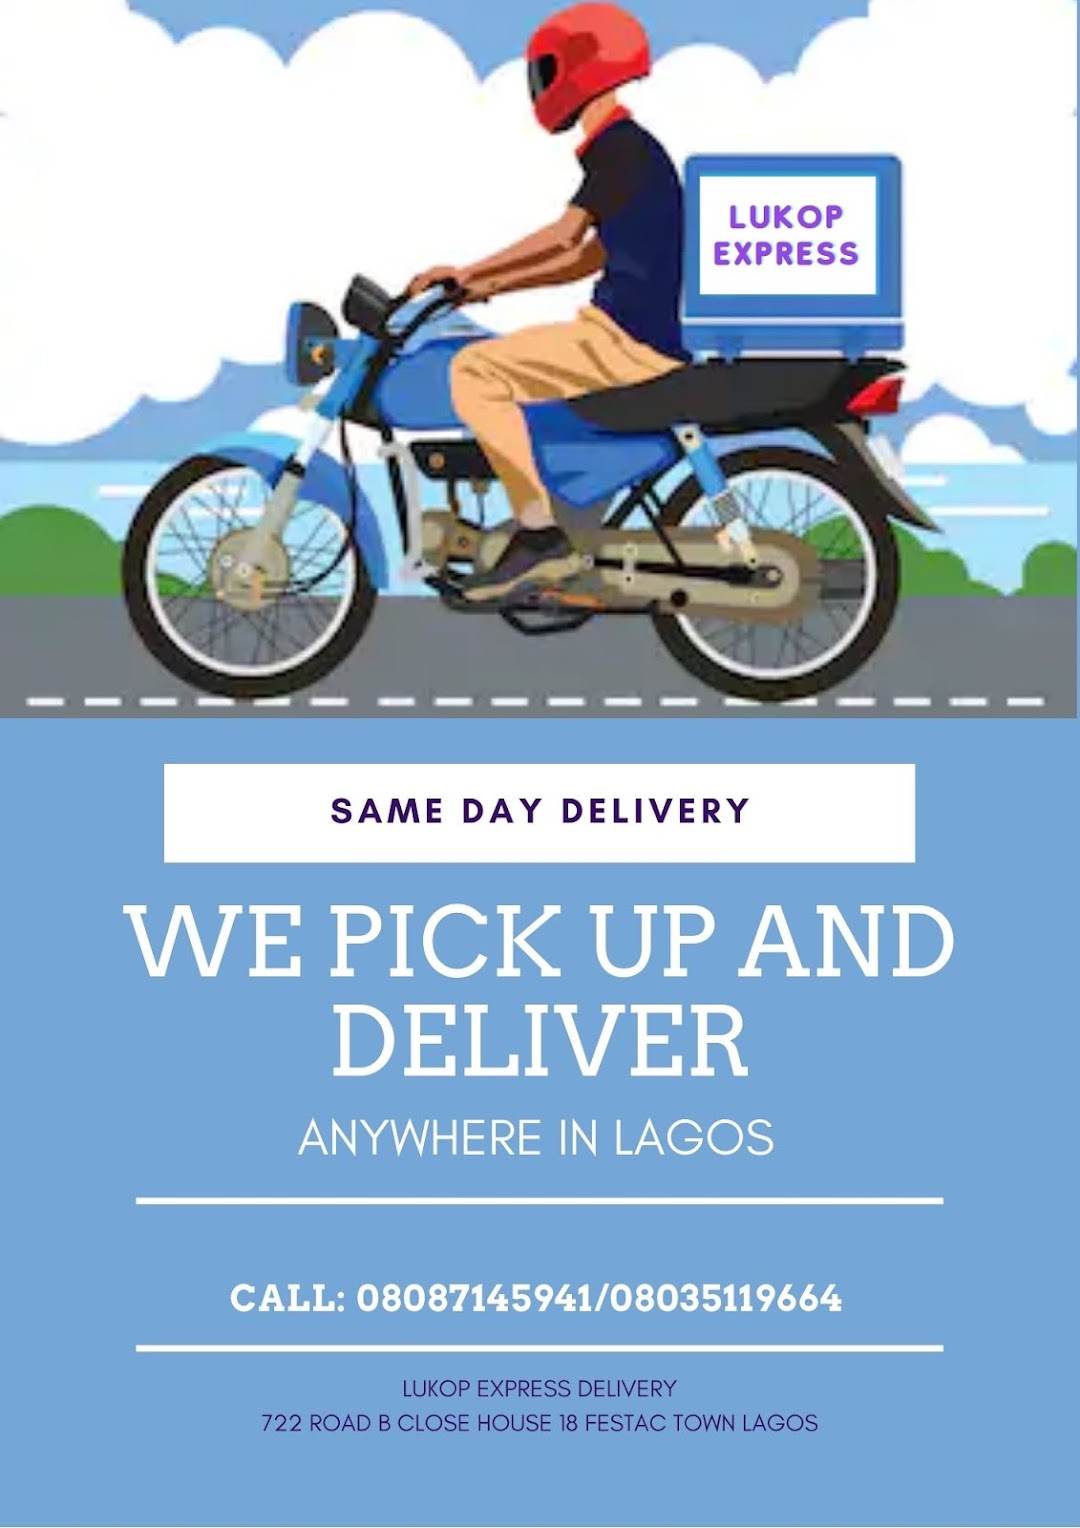 Lukop Express Delivery